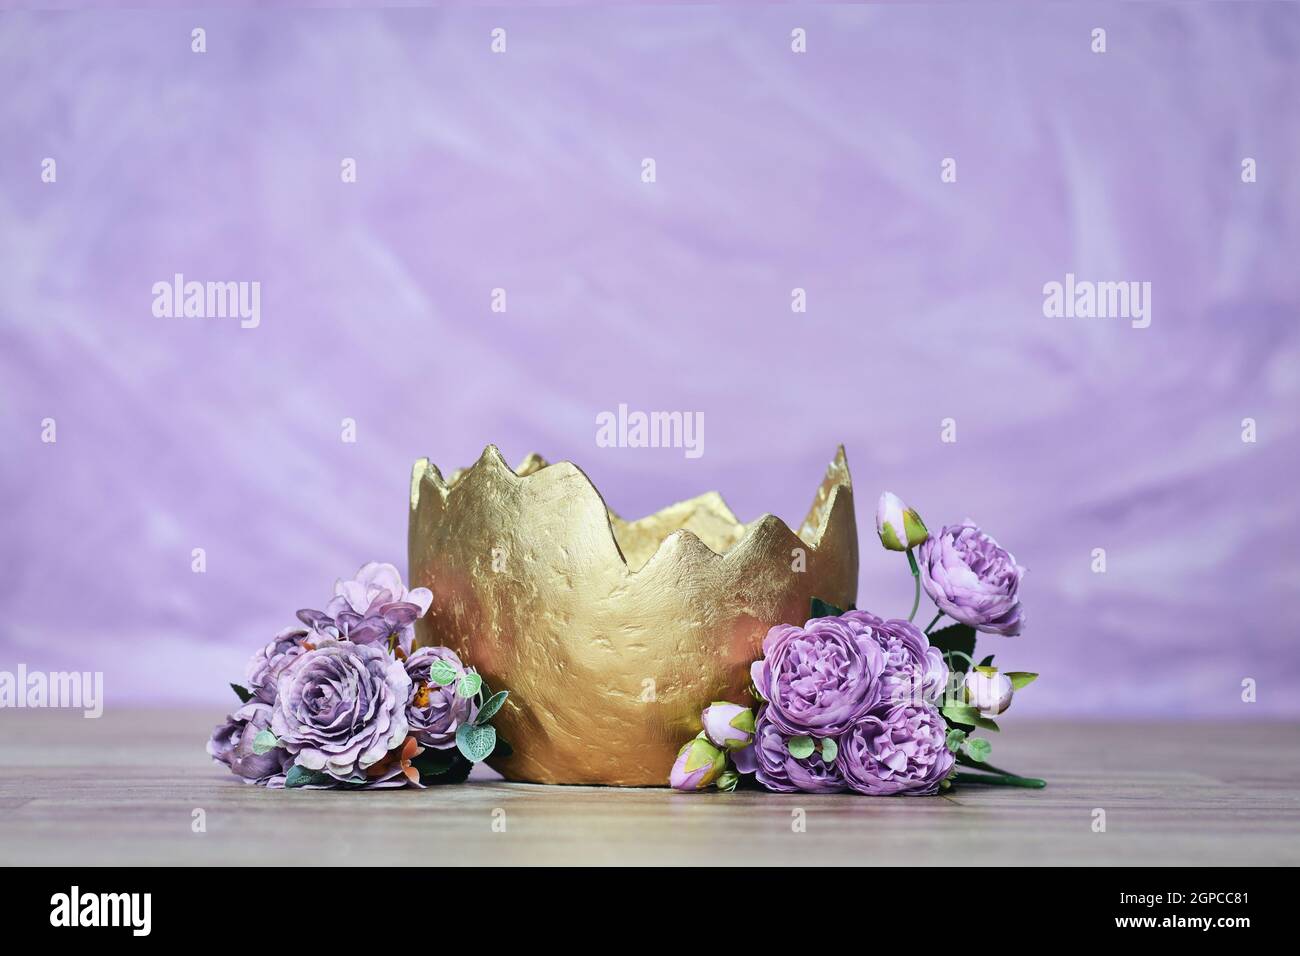 Newborn digital backdrop with golden egg with flowers on violet background Stock Photo